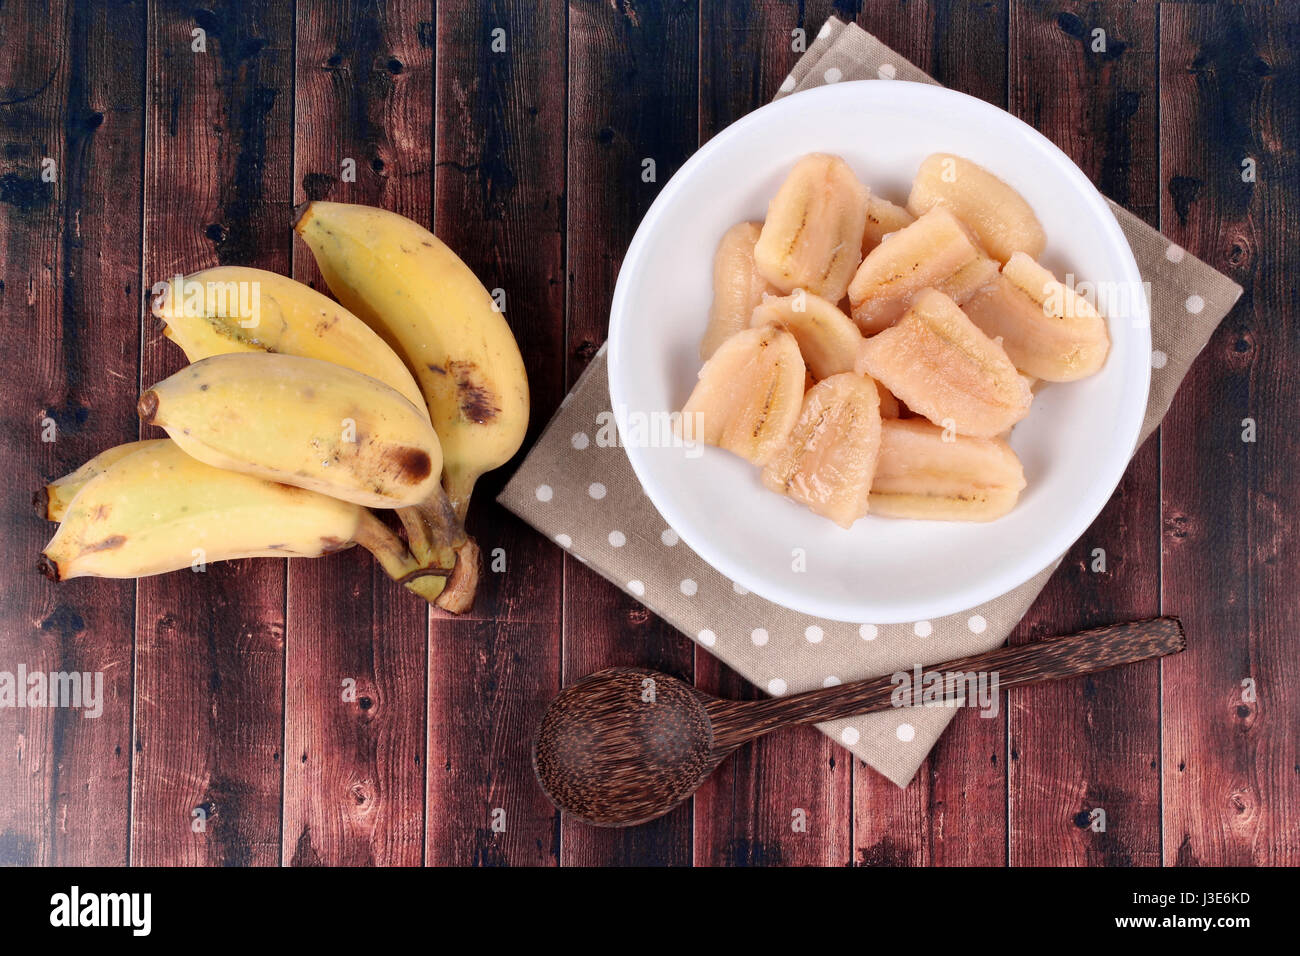 Thai popular dessert , Ready served of boiled banana in syrup and wholes of banana served on wood. Stock Photo